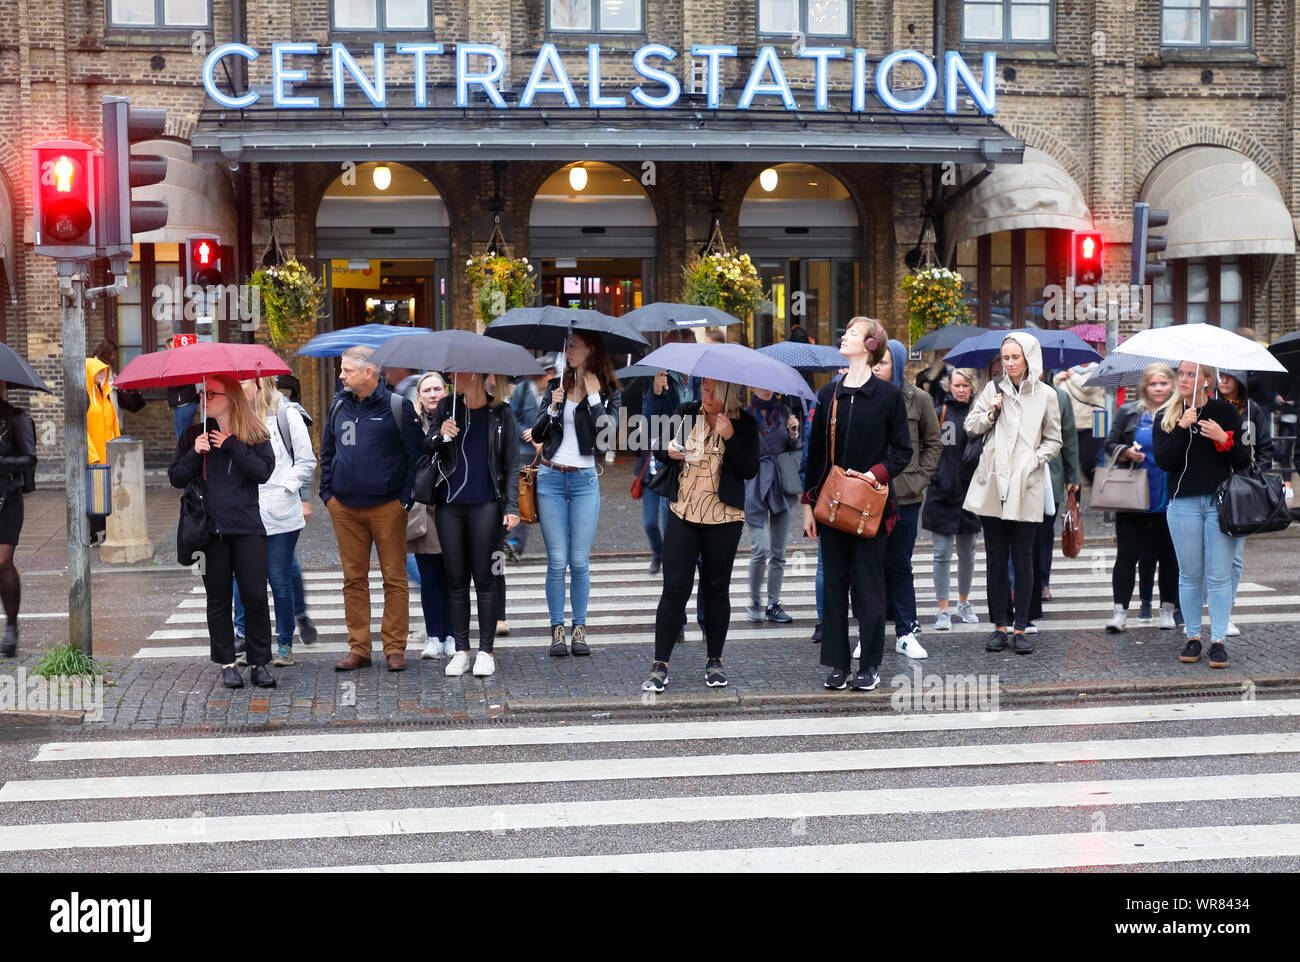 Gothenburg, Sweden - September 3, 2019: People at the crosswalk outside the Central station waiting with umbrrallas in the rain for a green light. Stock Photo